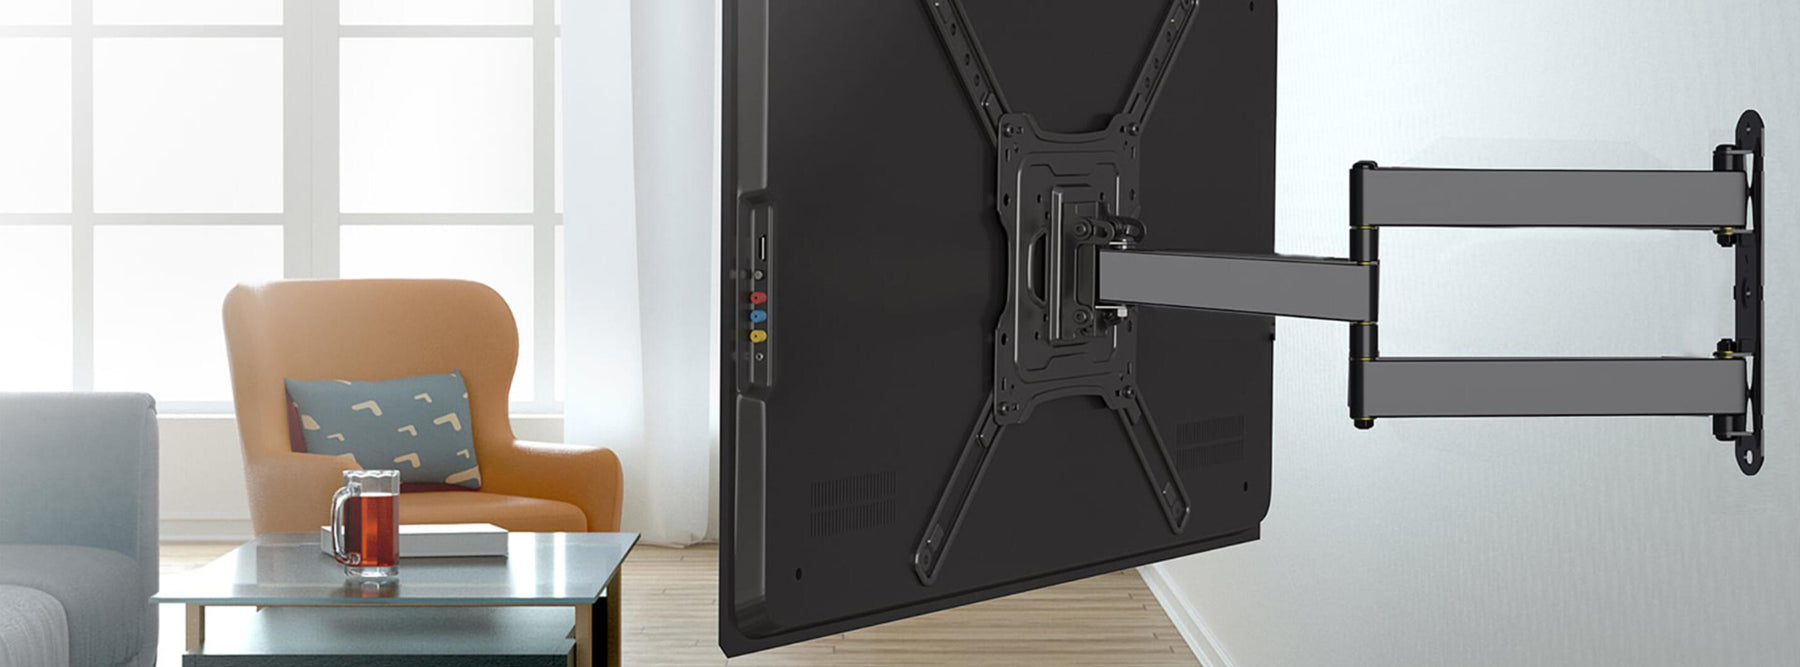 A Guide to Choosing the Right Size TV Mount (60/65/82 Inch)